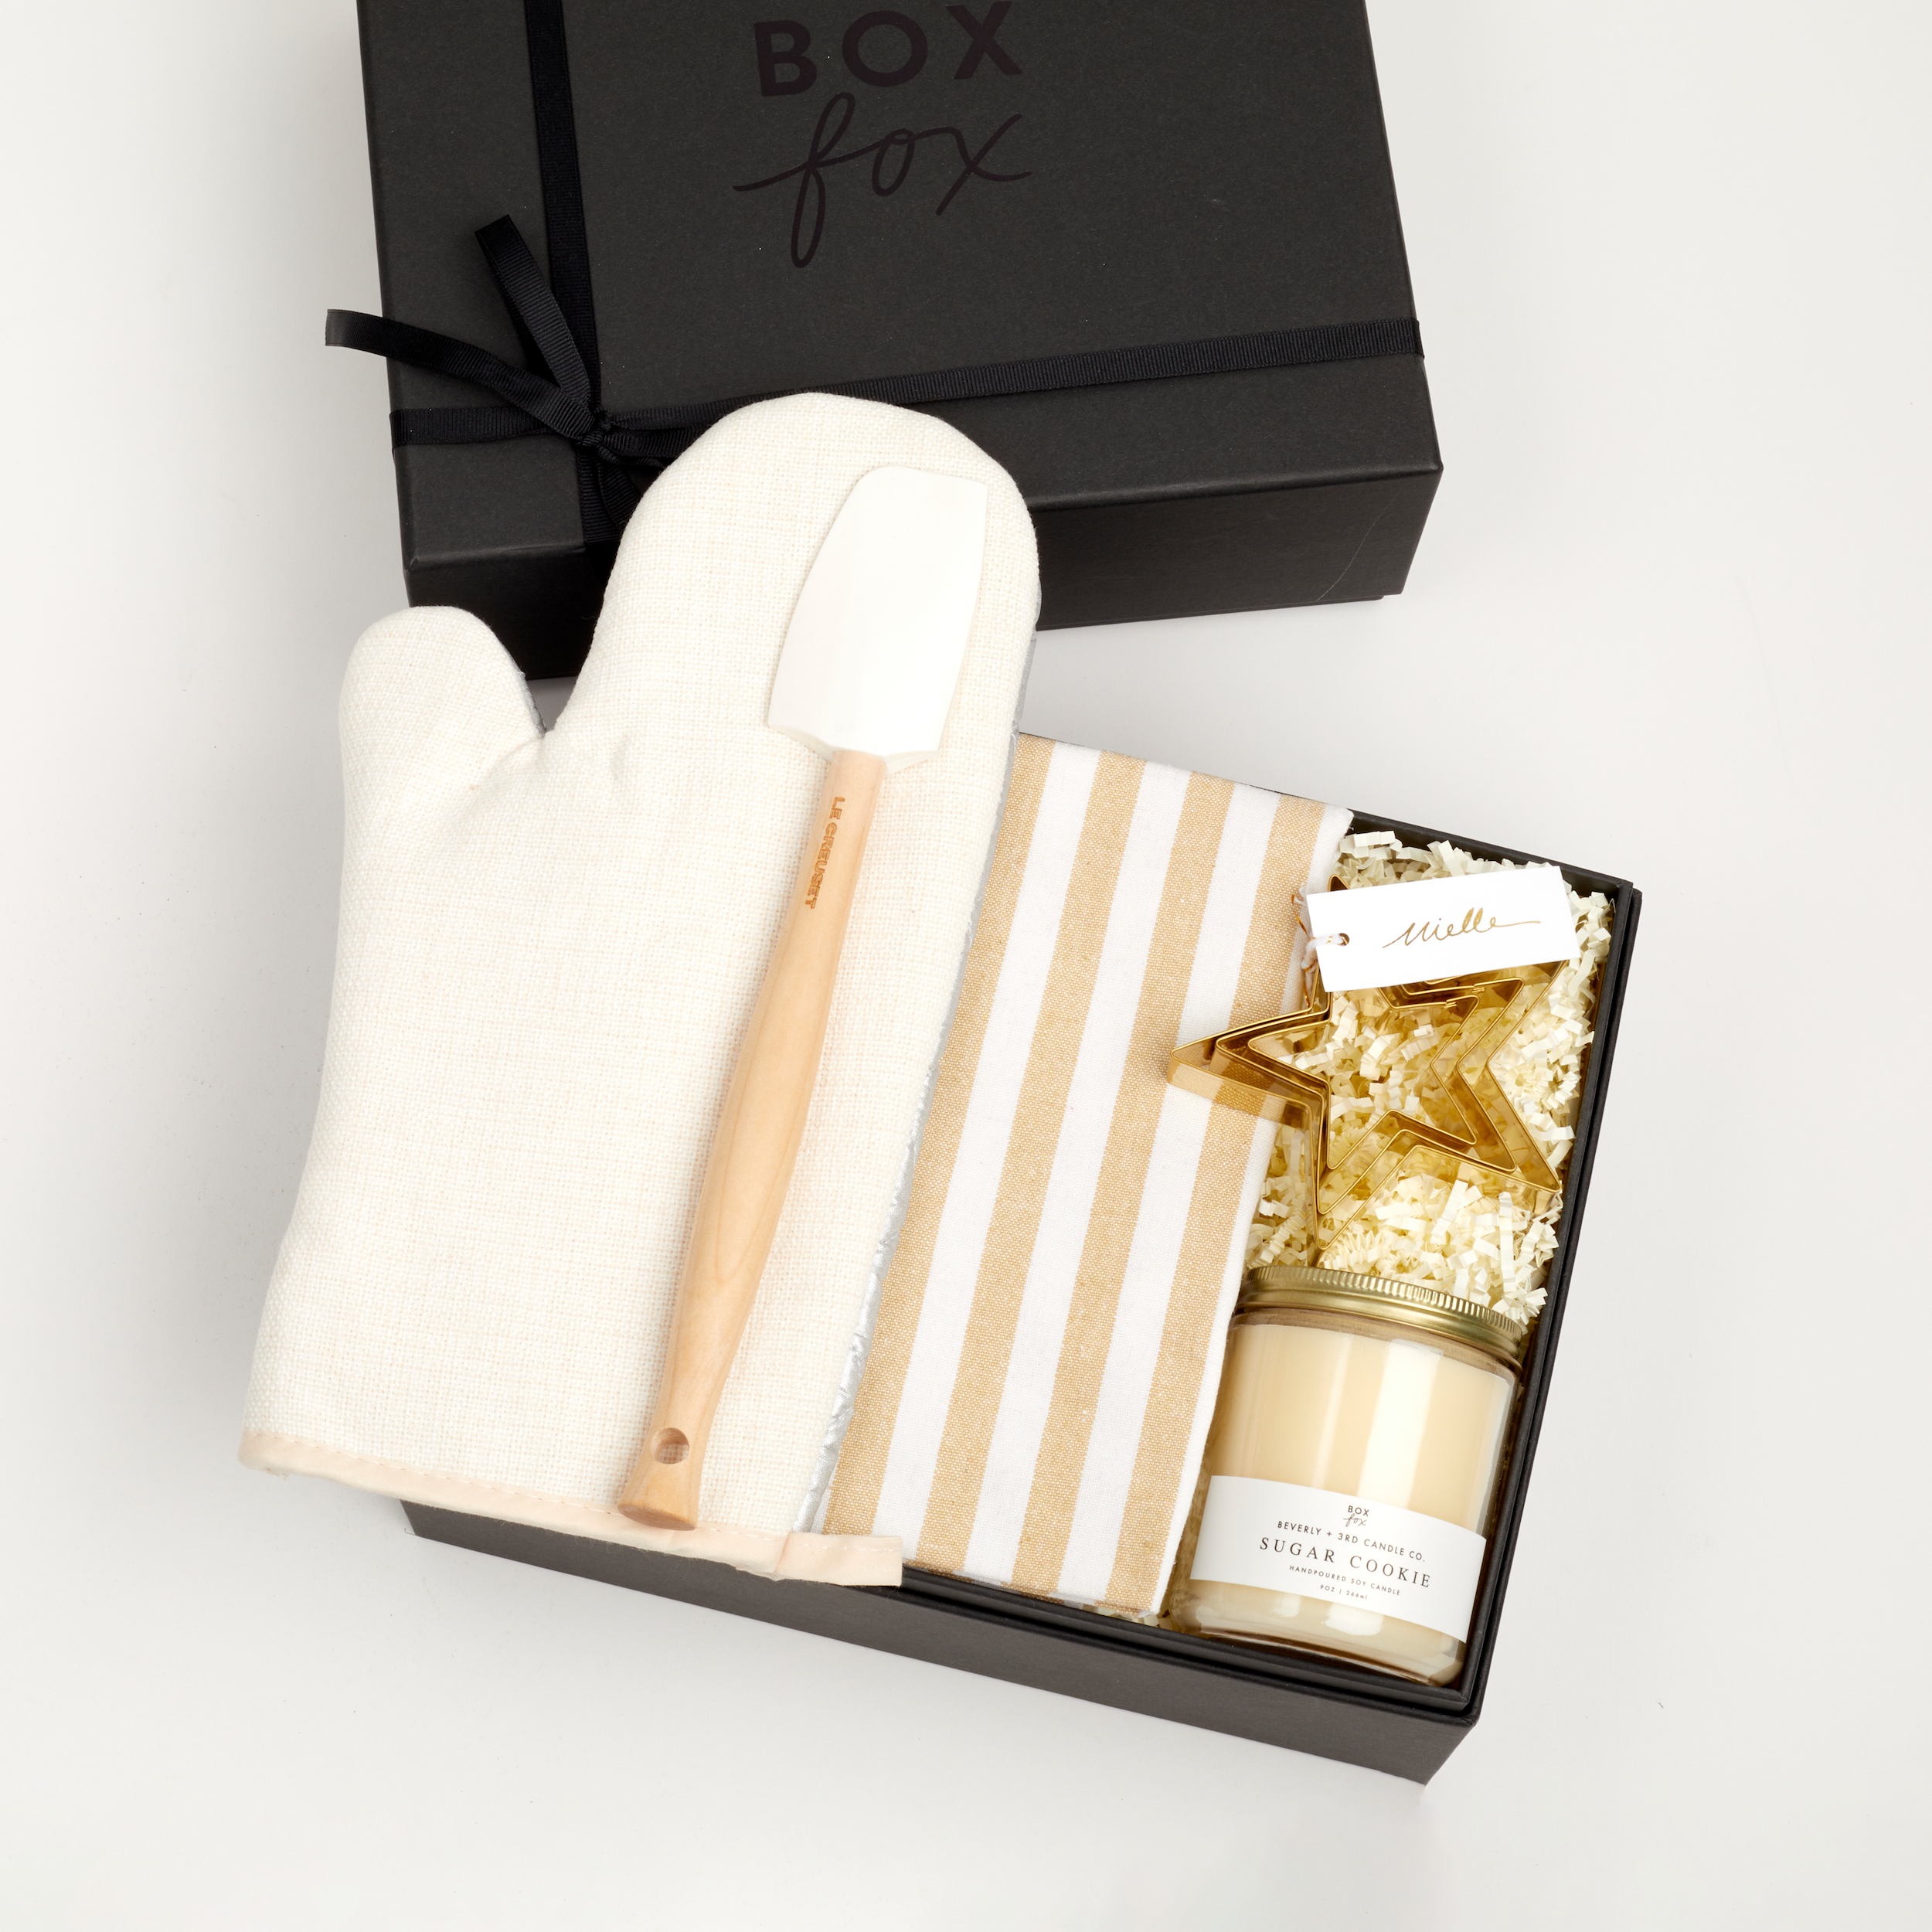 The BAKING box in black, which includes an oven mitt, spatula, striped dish towel, cookie cutters and a sugar cookie candle.